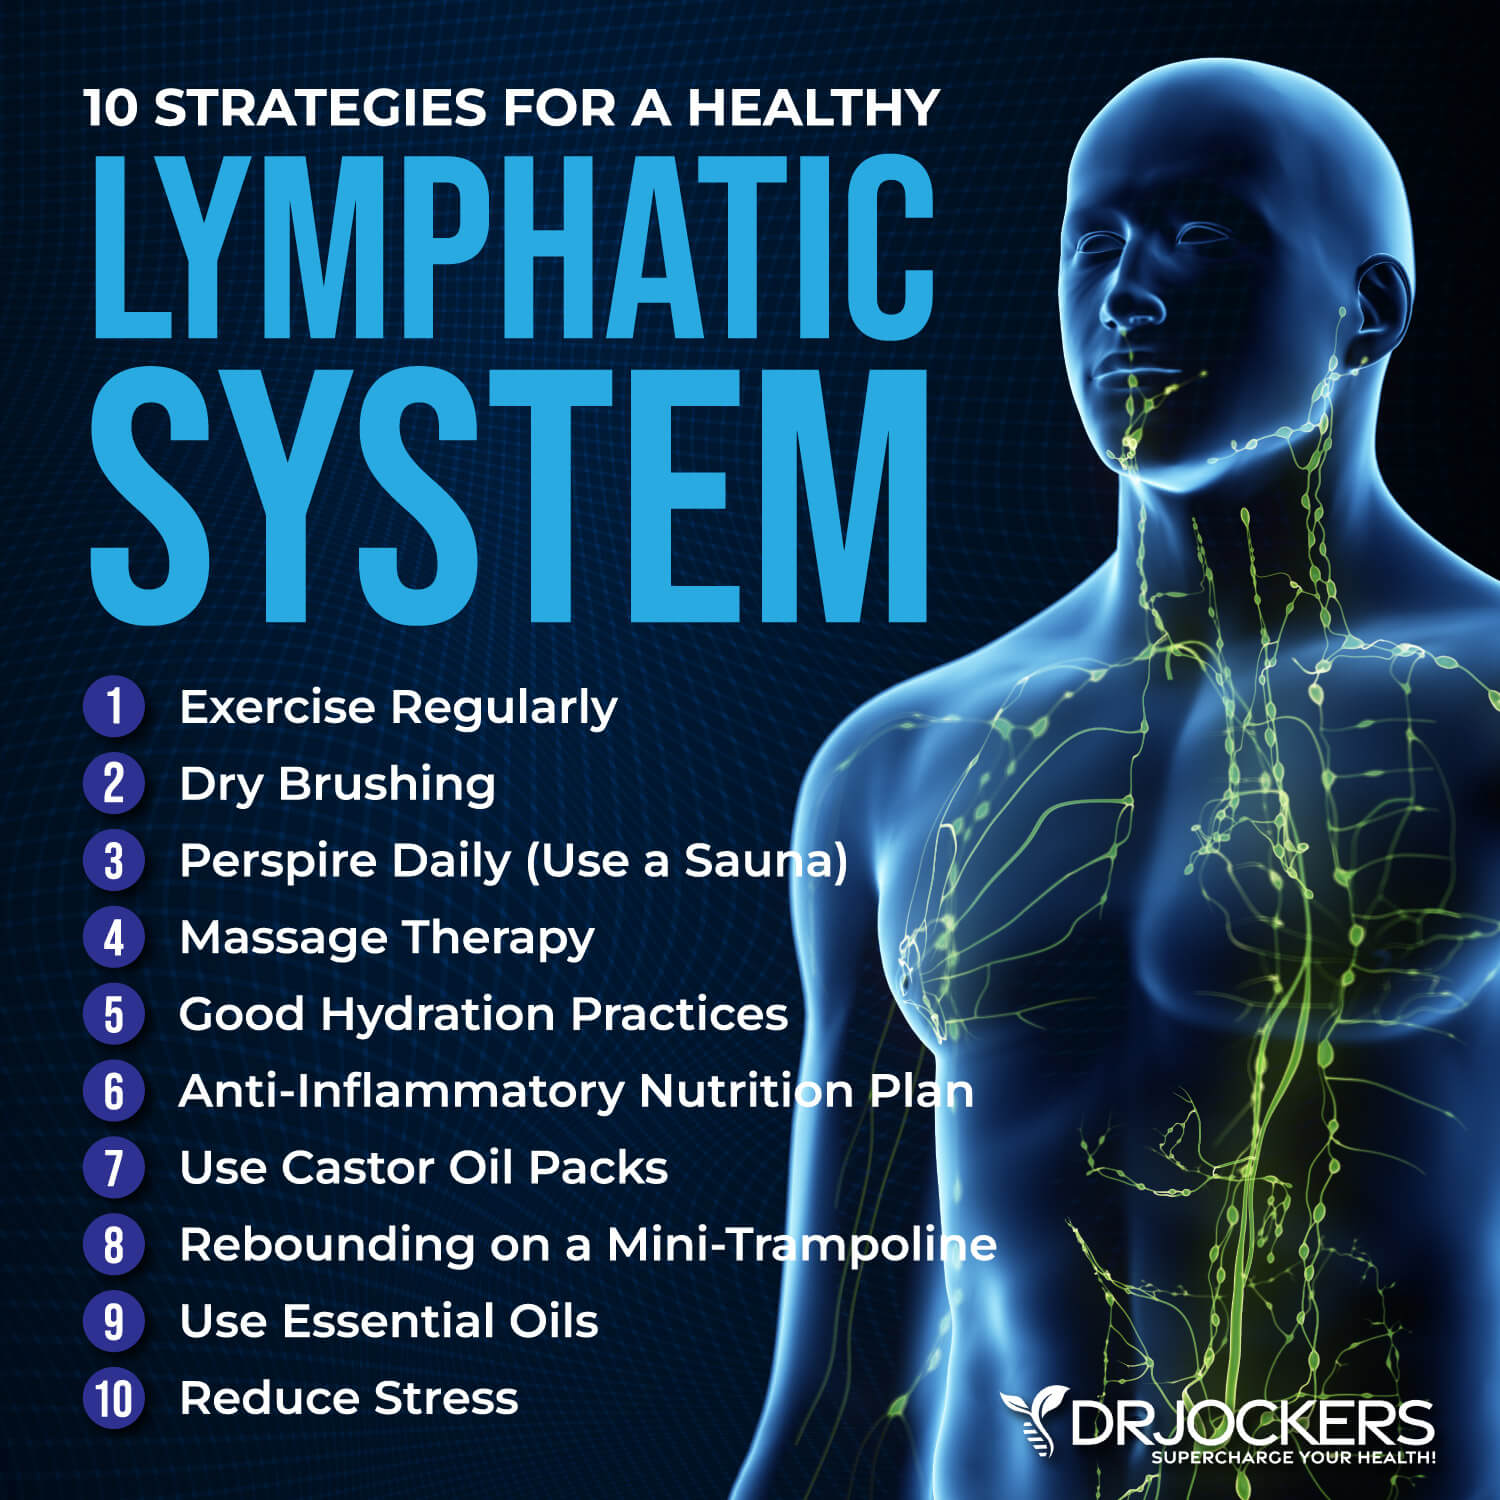 Top rebounding tips to cleanse your lymphatic system - La Crisalida Retreats